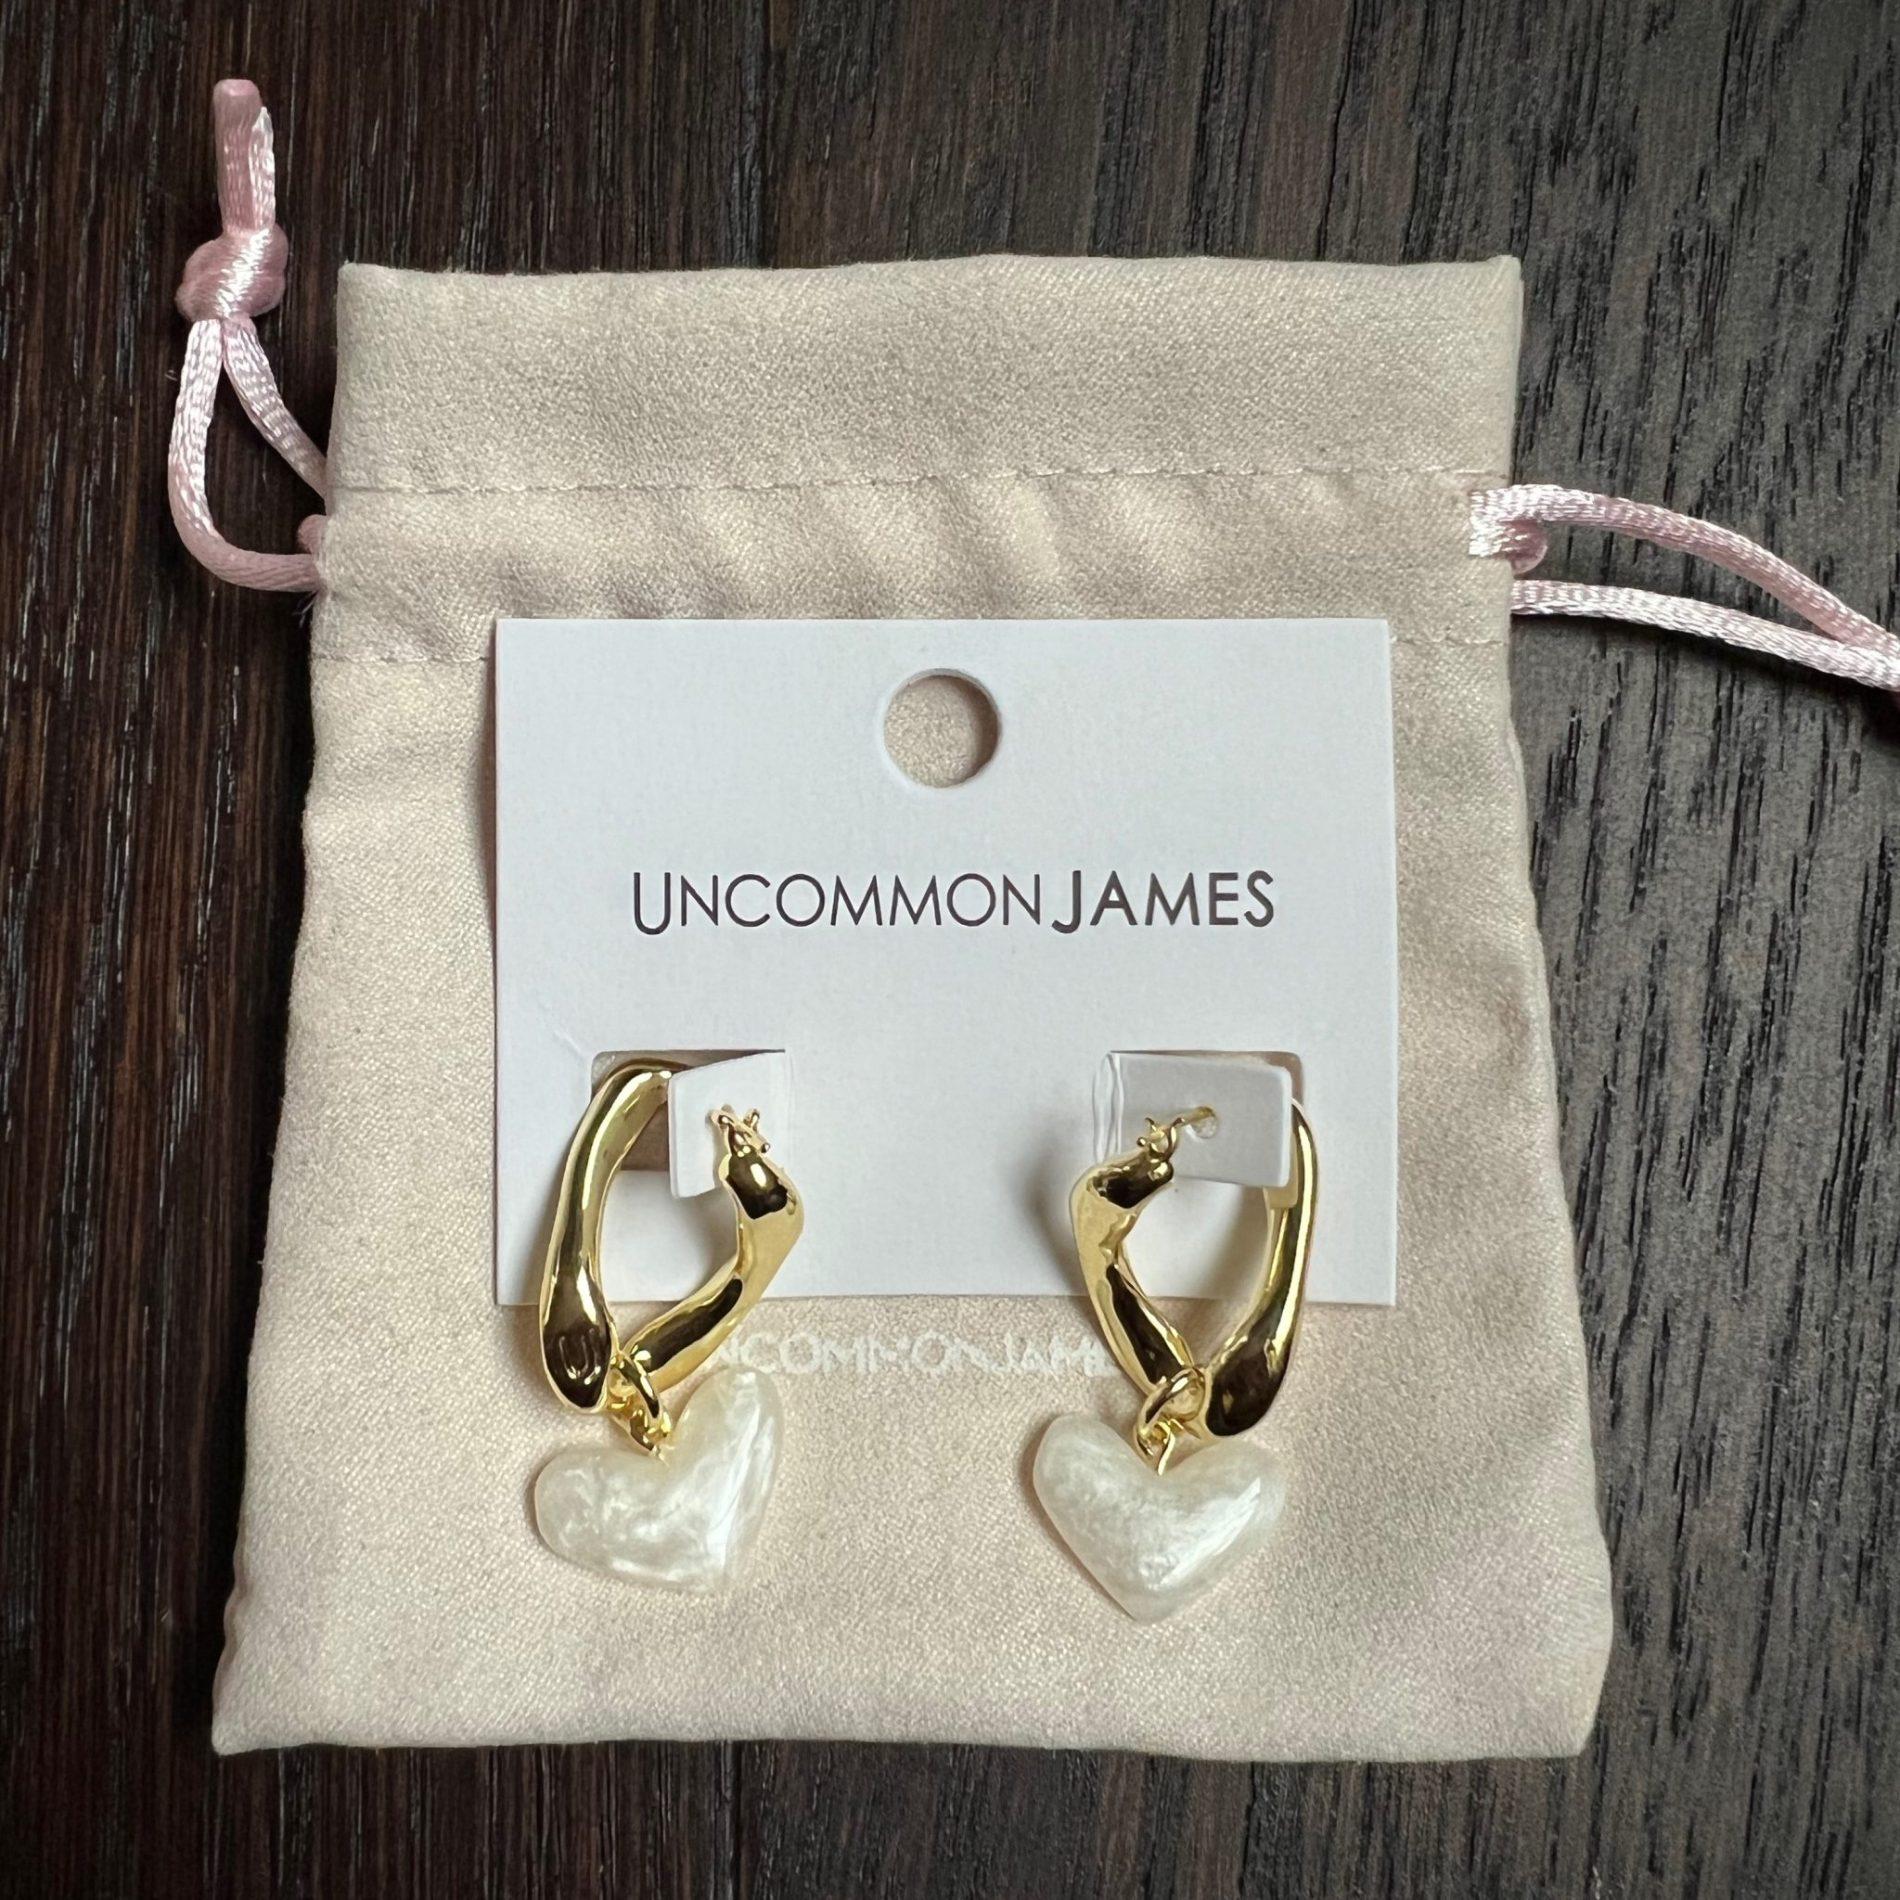 Uncommon James Monthly Mystery Item Review – Fall 2022